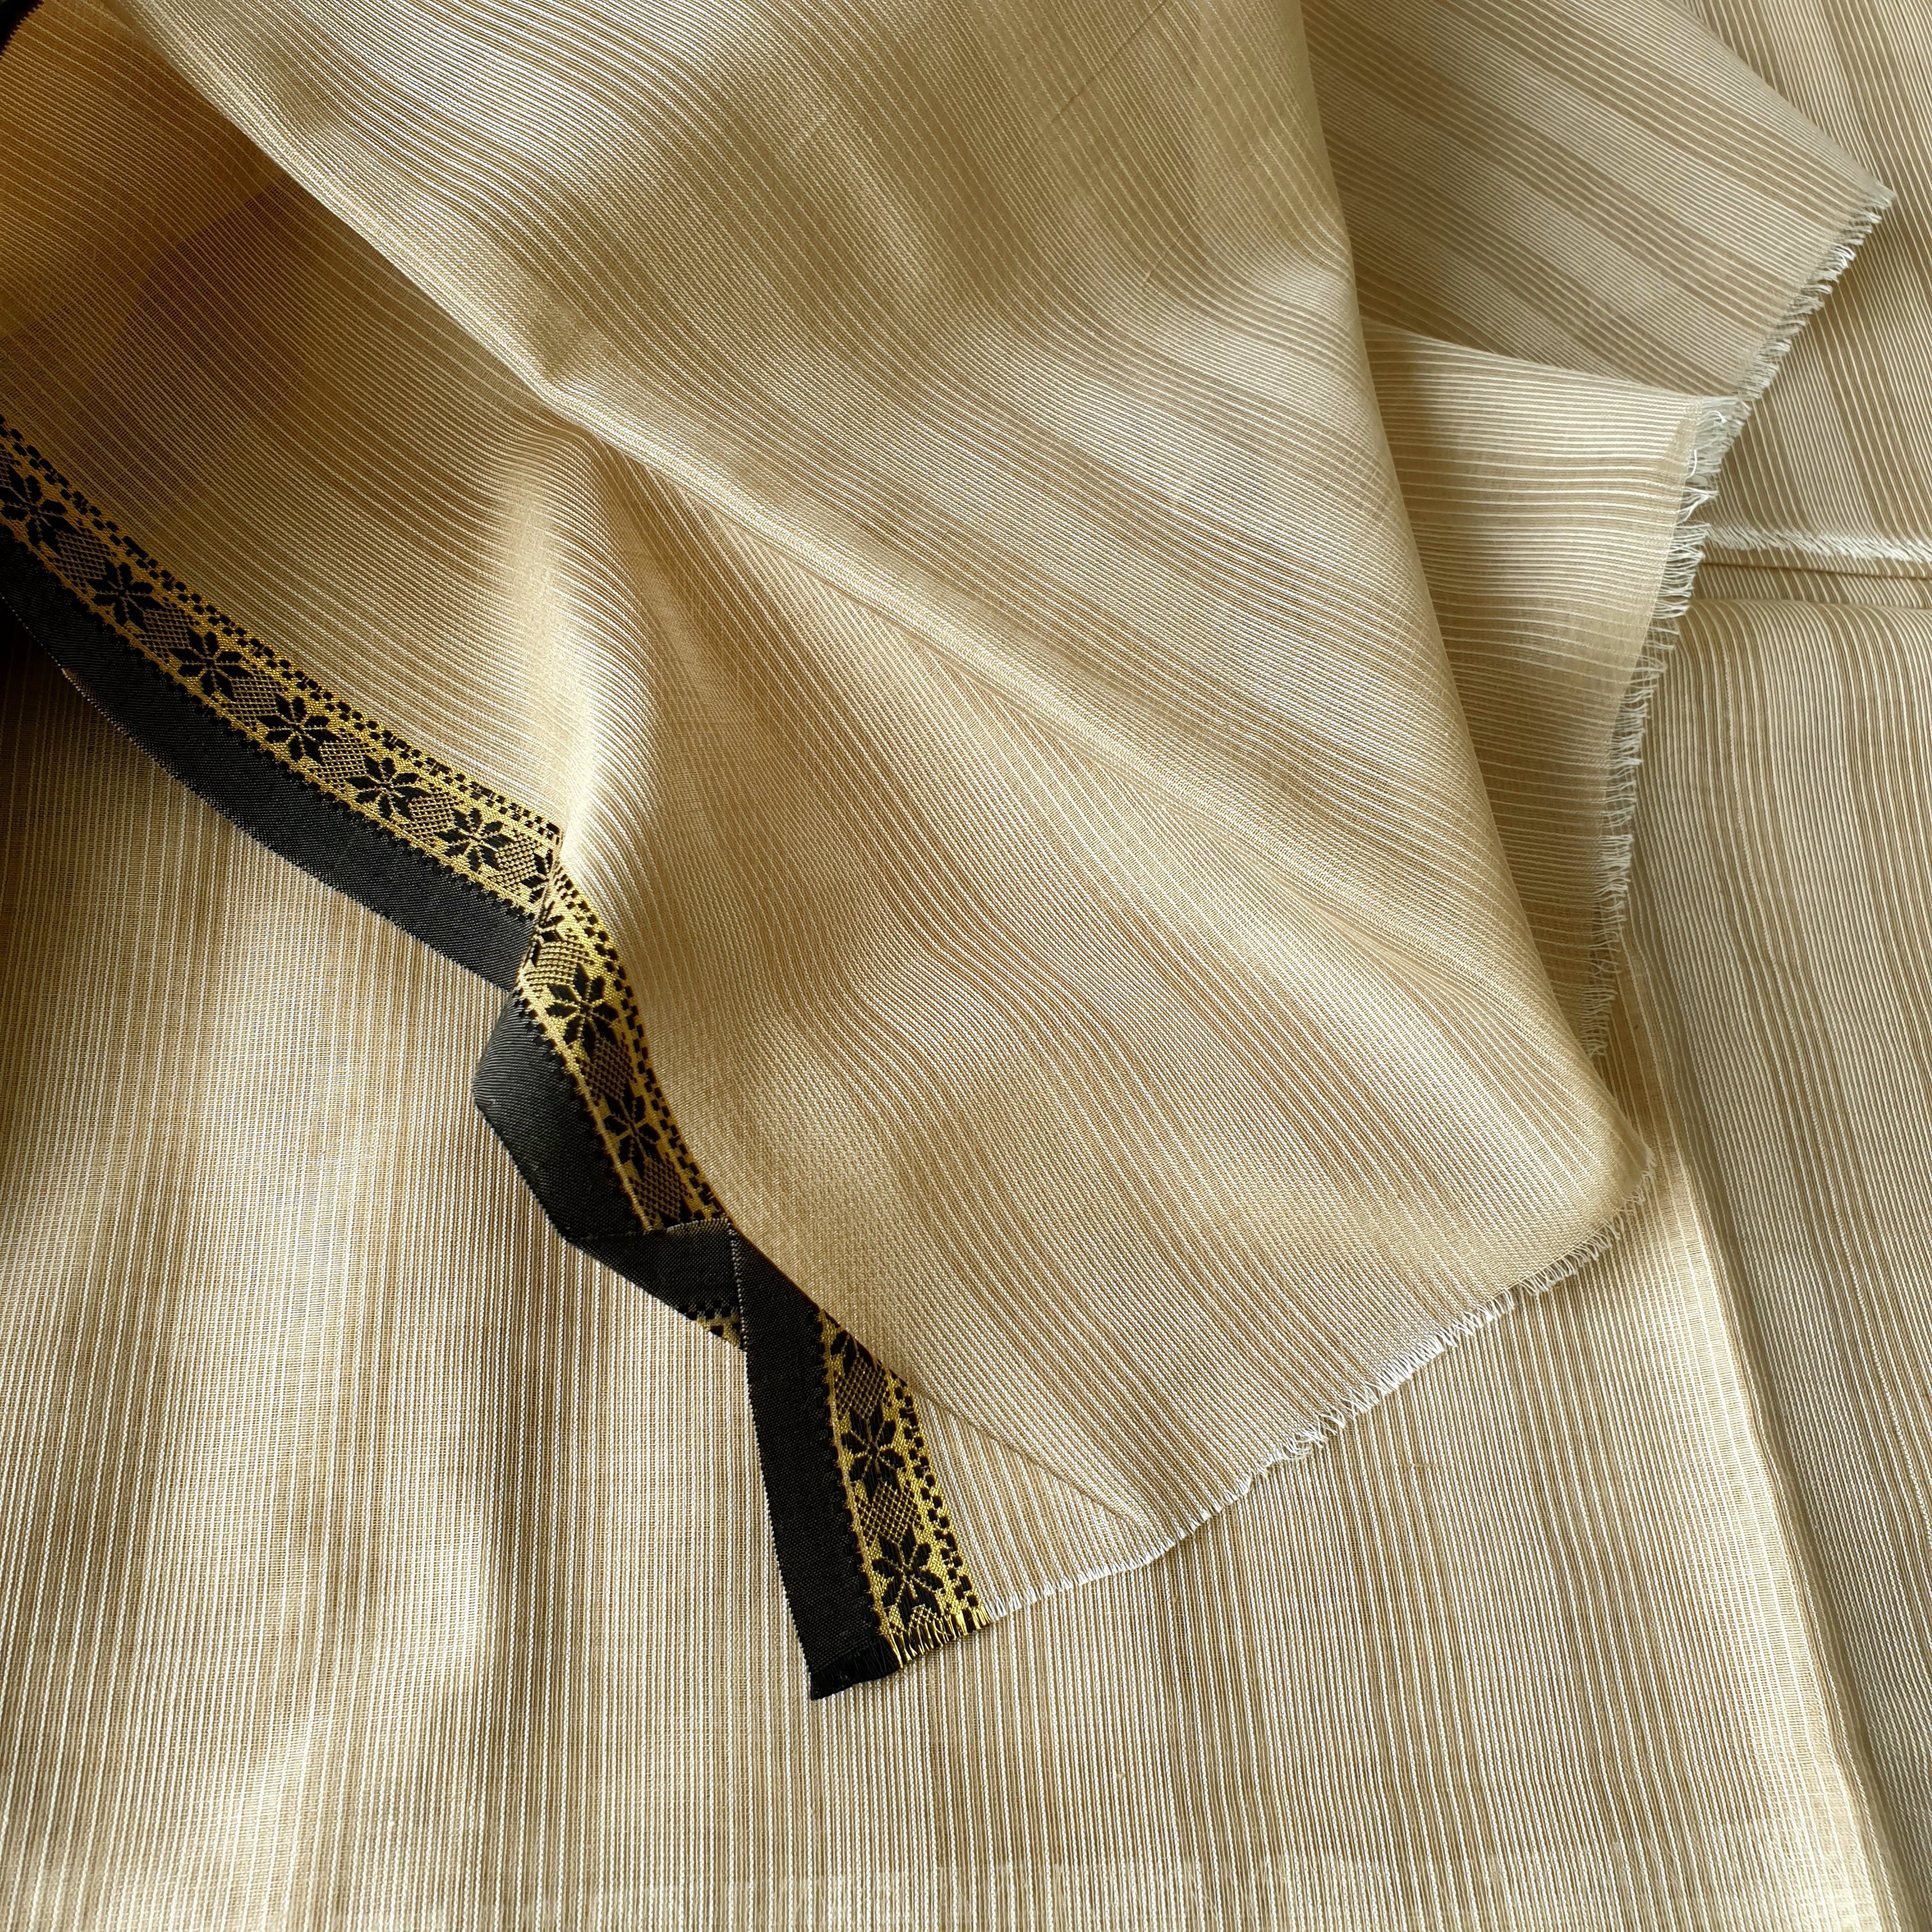 Kurta Piece with self Stripes and Gold/Black Borders.